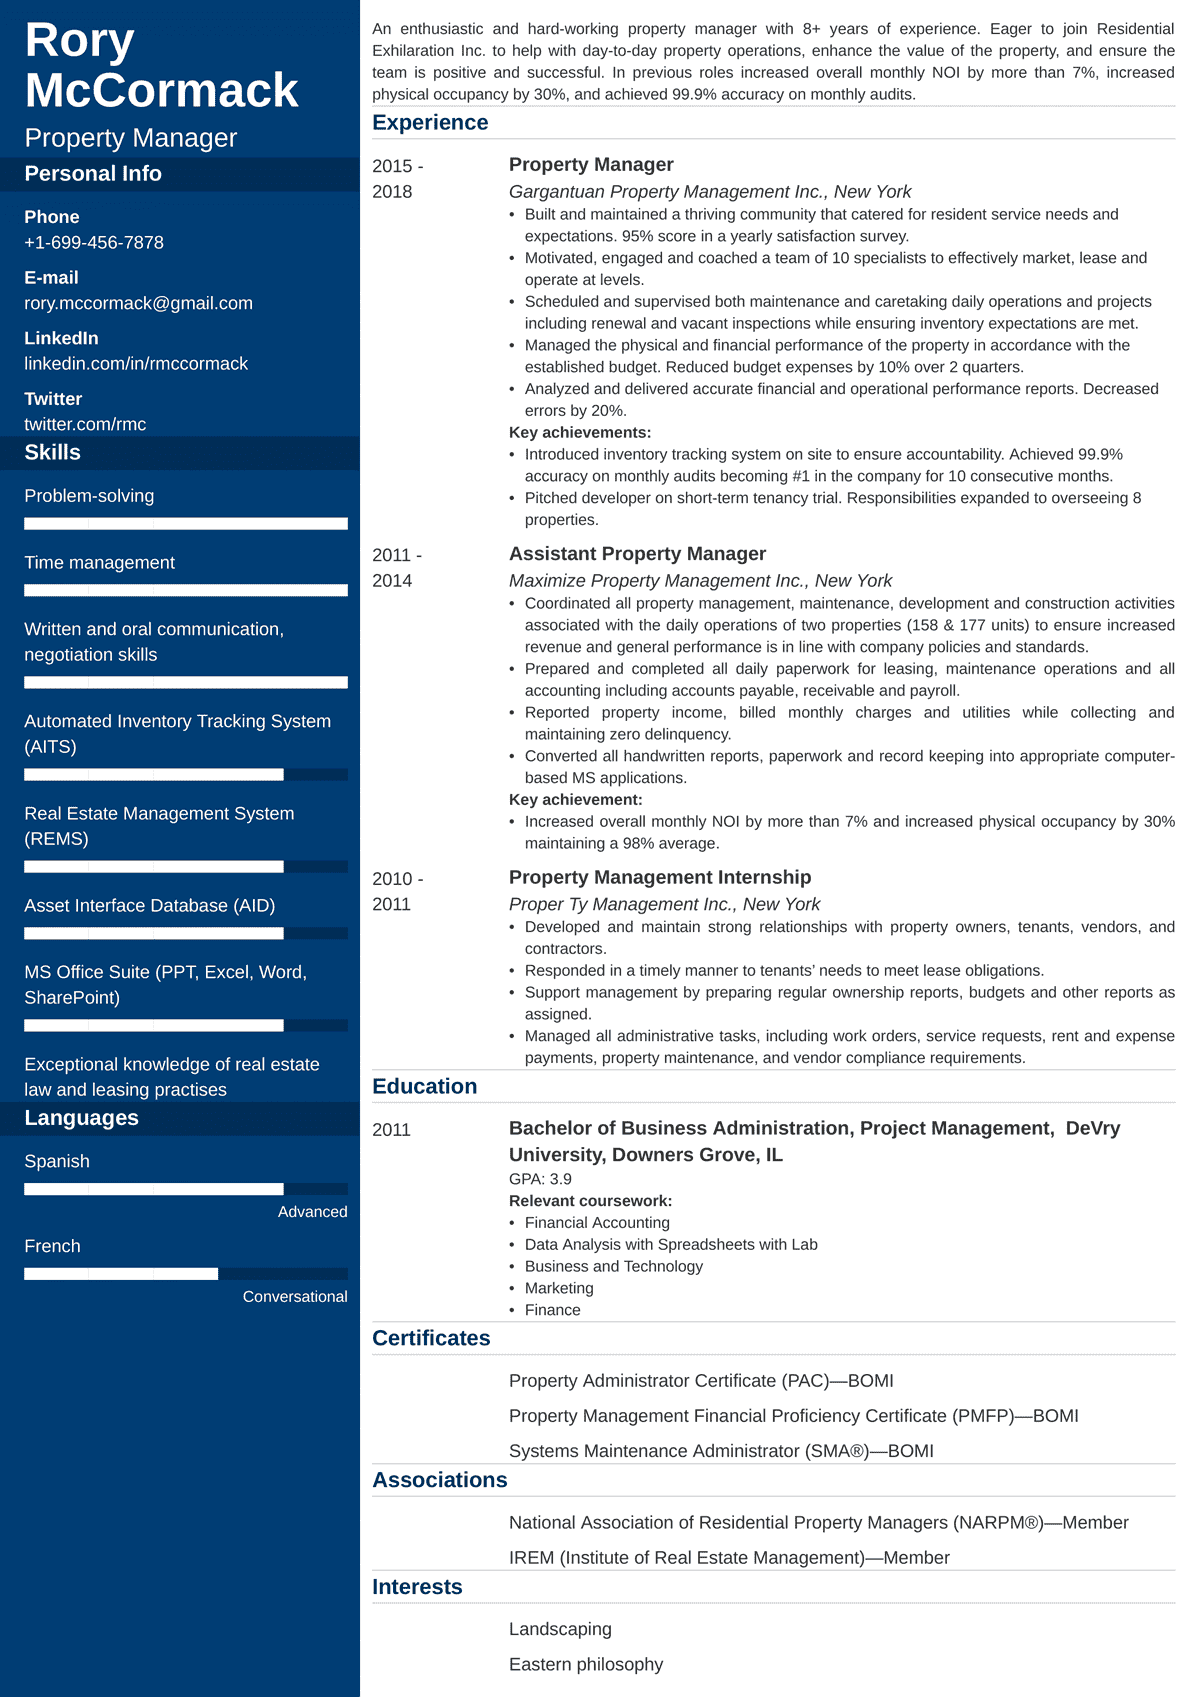 Property Manager Resume Sample: 29+ Examples and Writing Tips